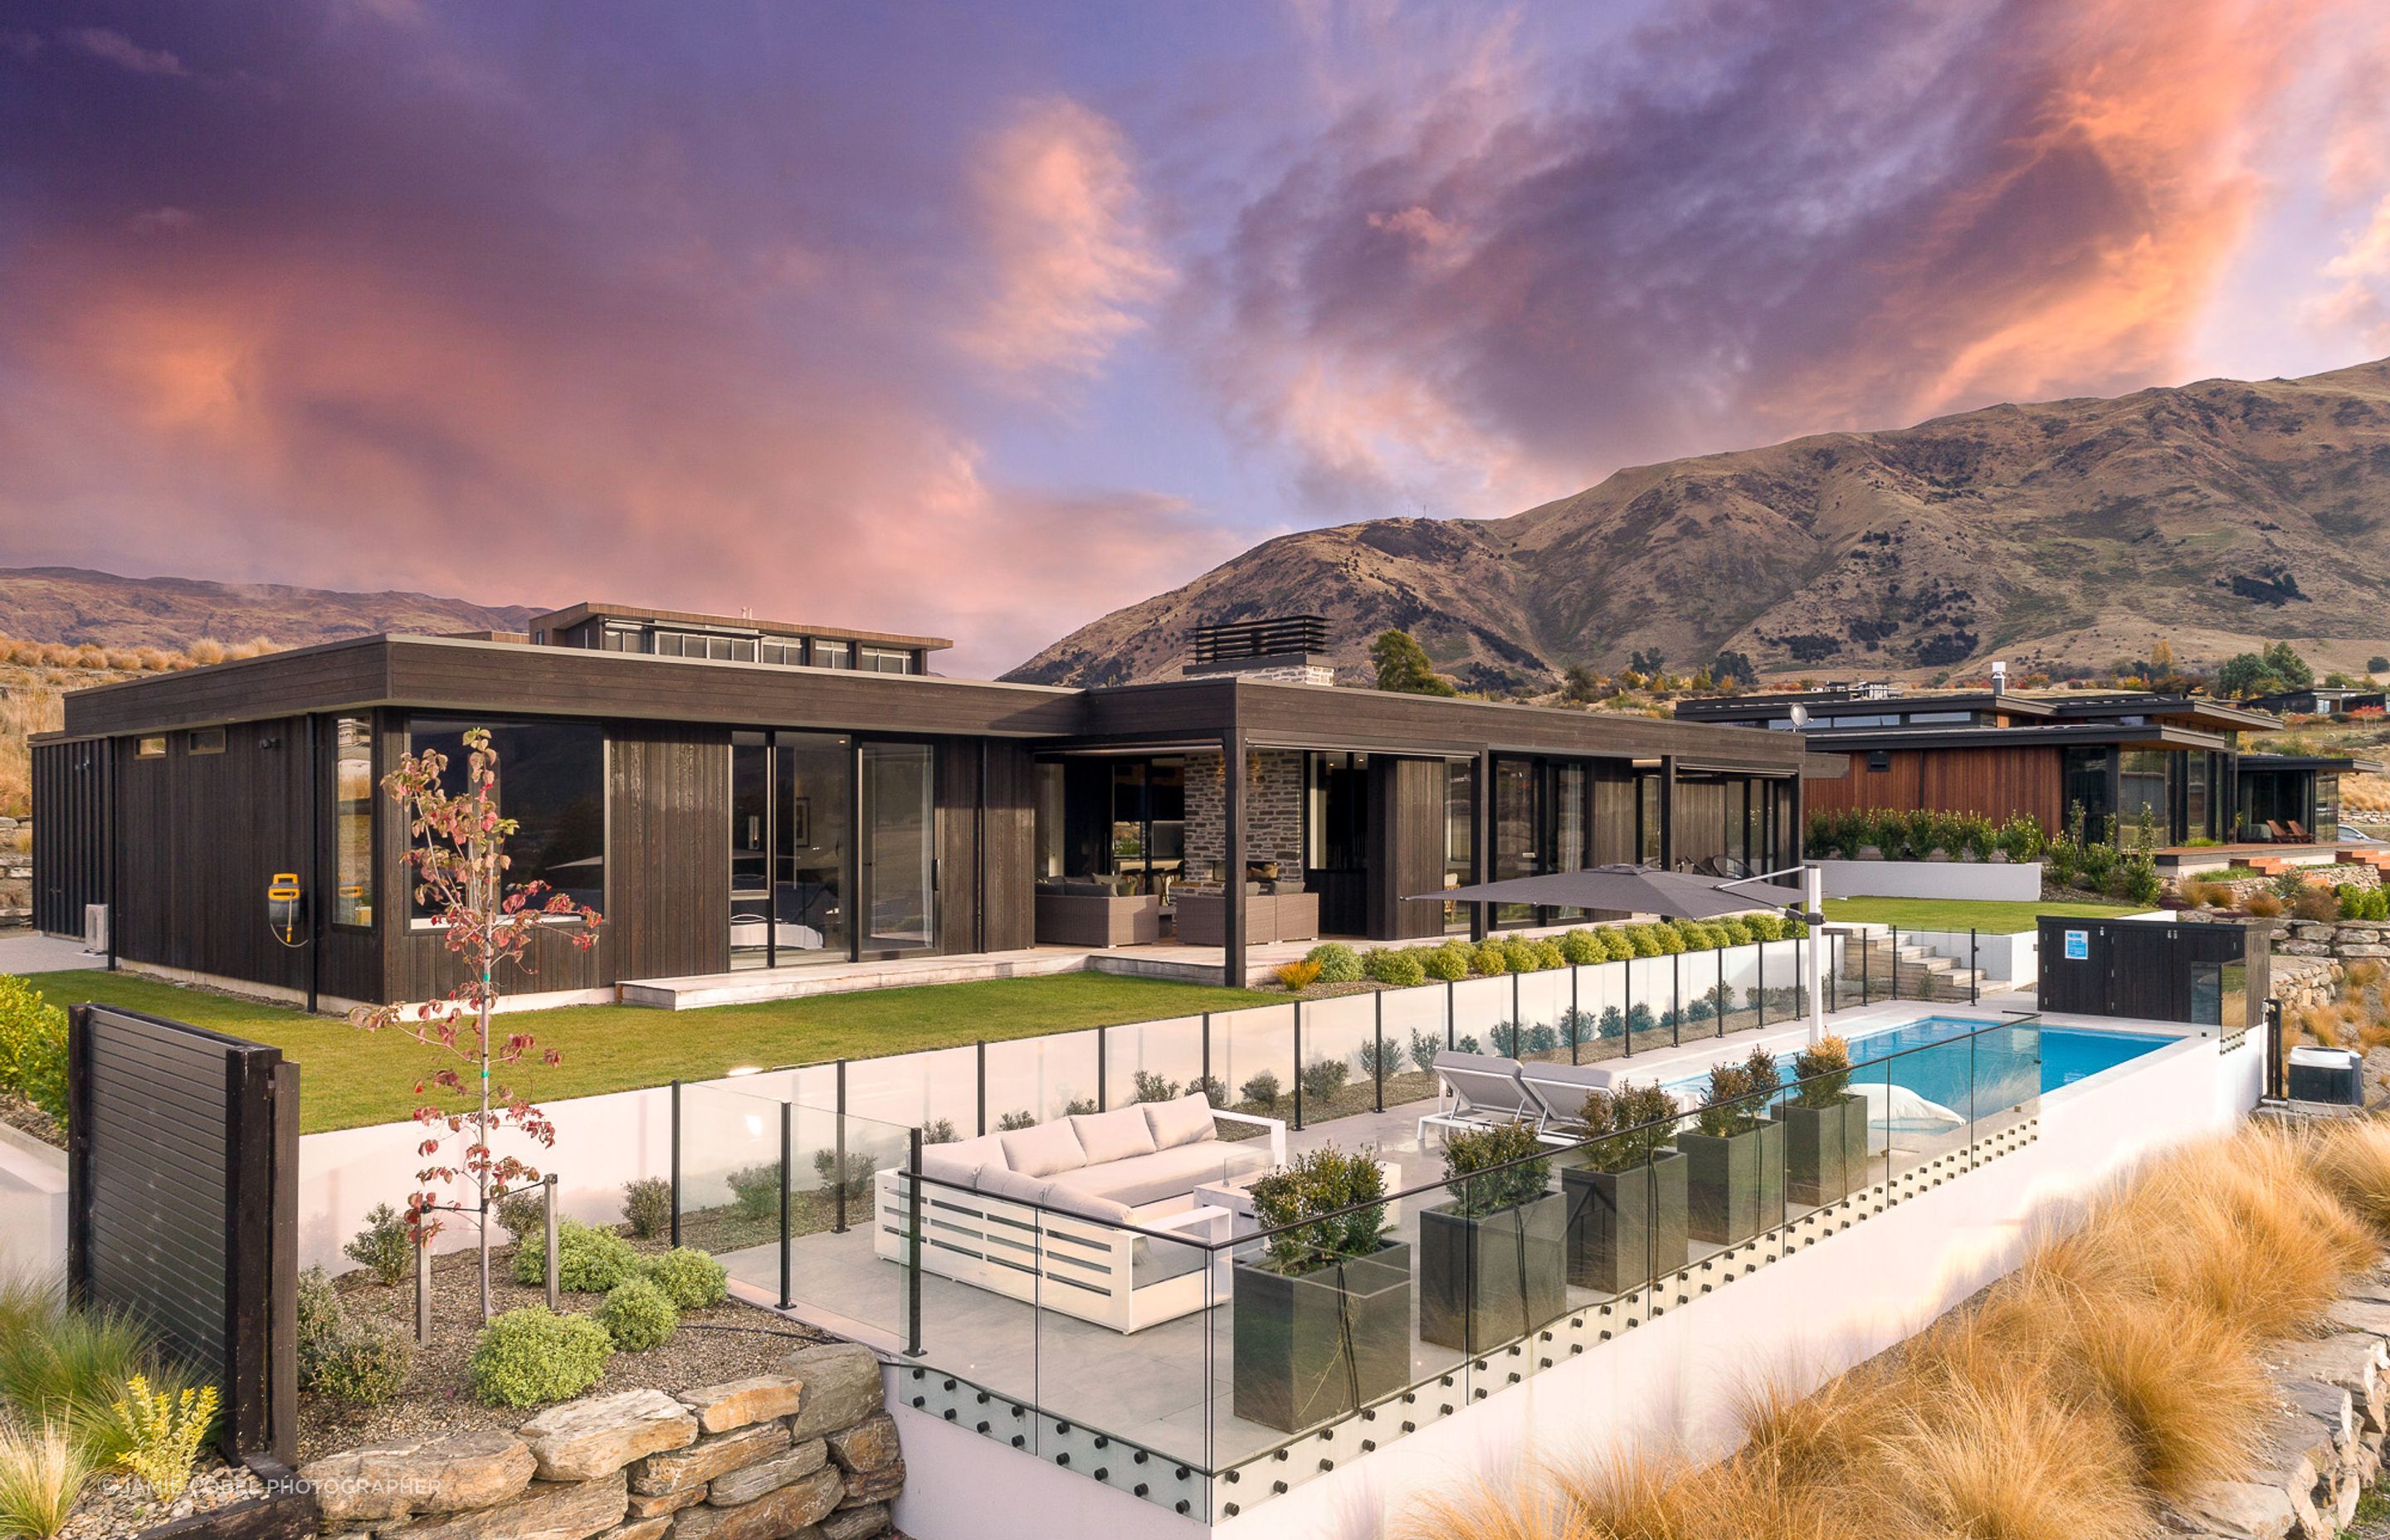 Exterior. Landscaping- by Tim at The Landscaper Wanaka. Interior Design- Kelly @ Archi Build Ltd.